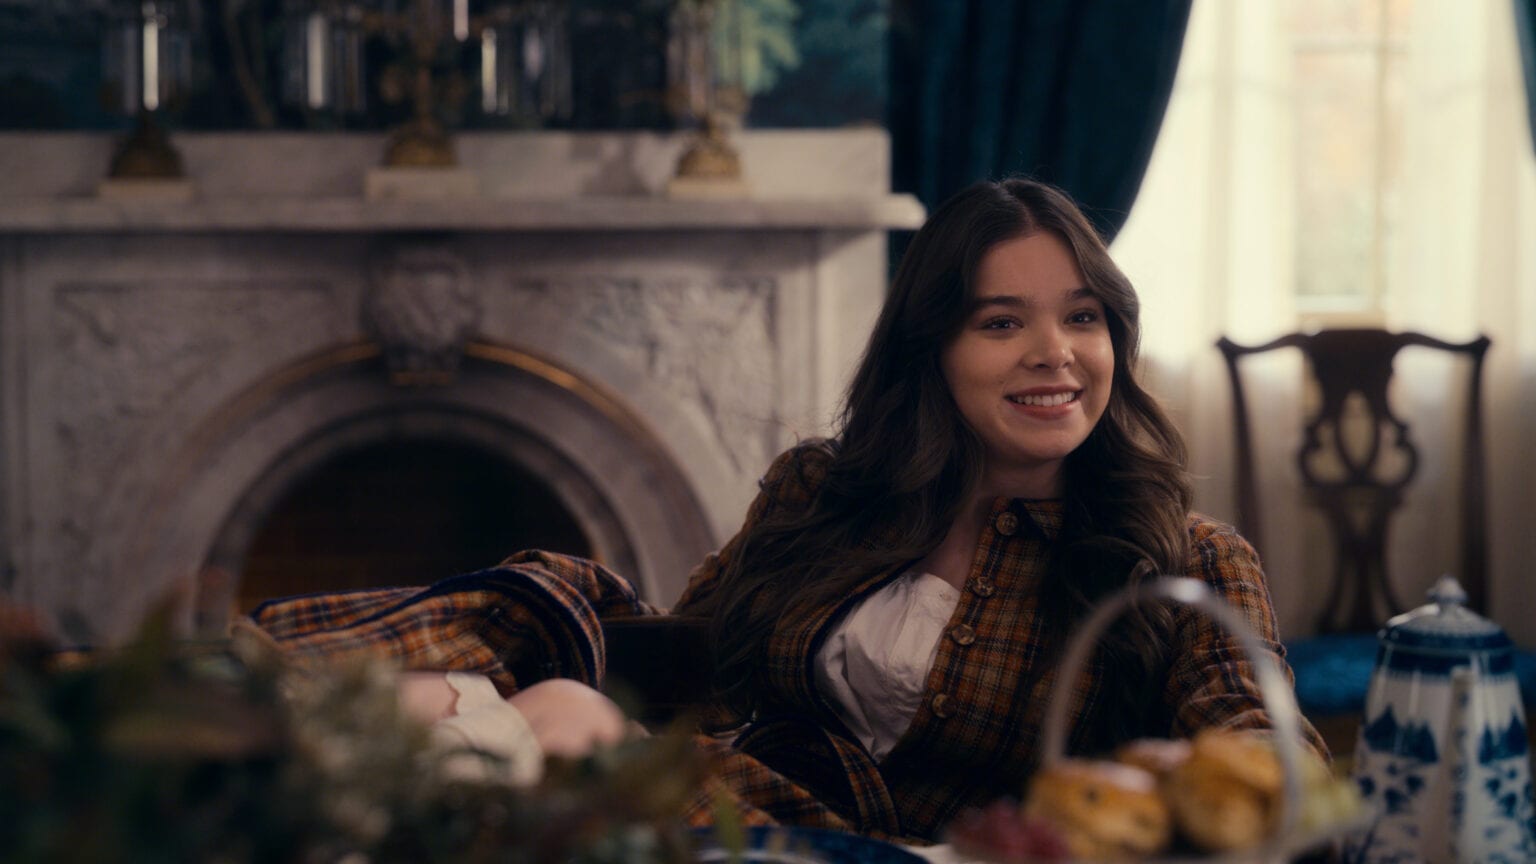 Emily Dickinson (played by Hailee Steinfeld) gets published ... and disappears!